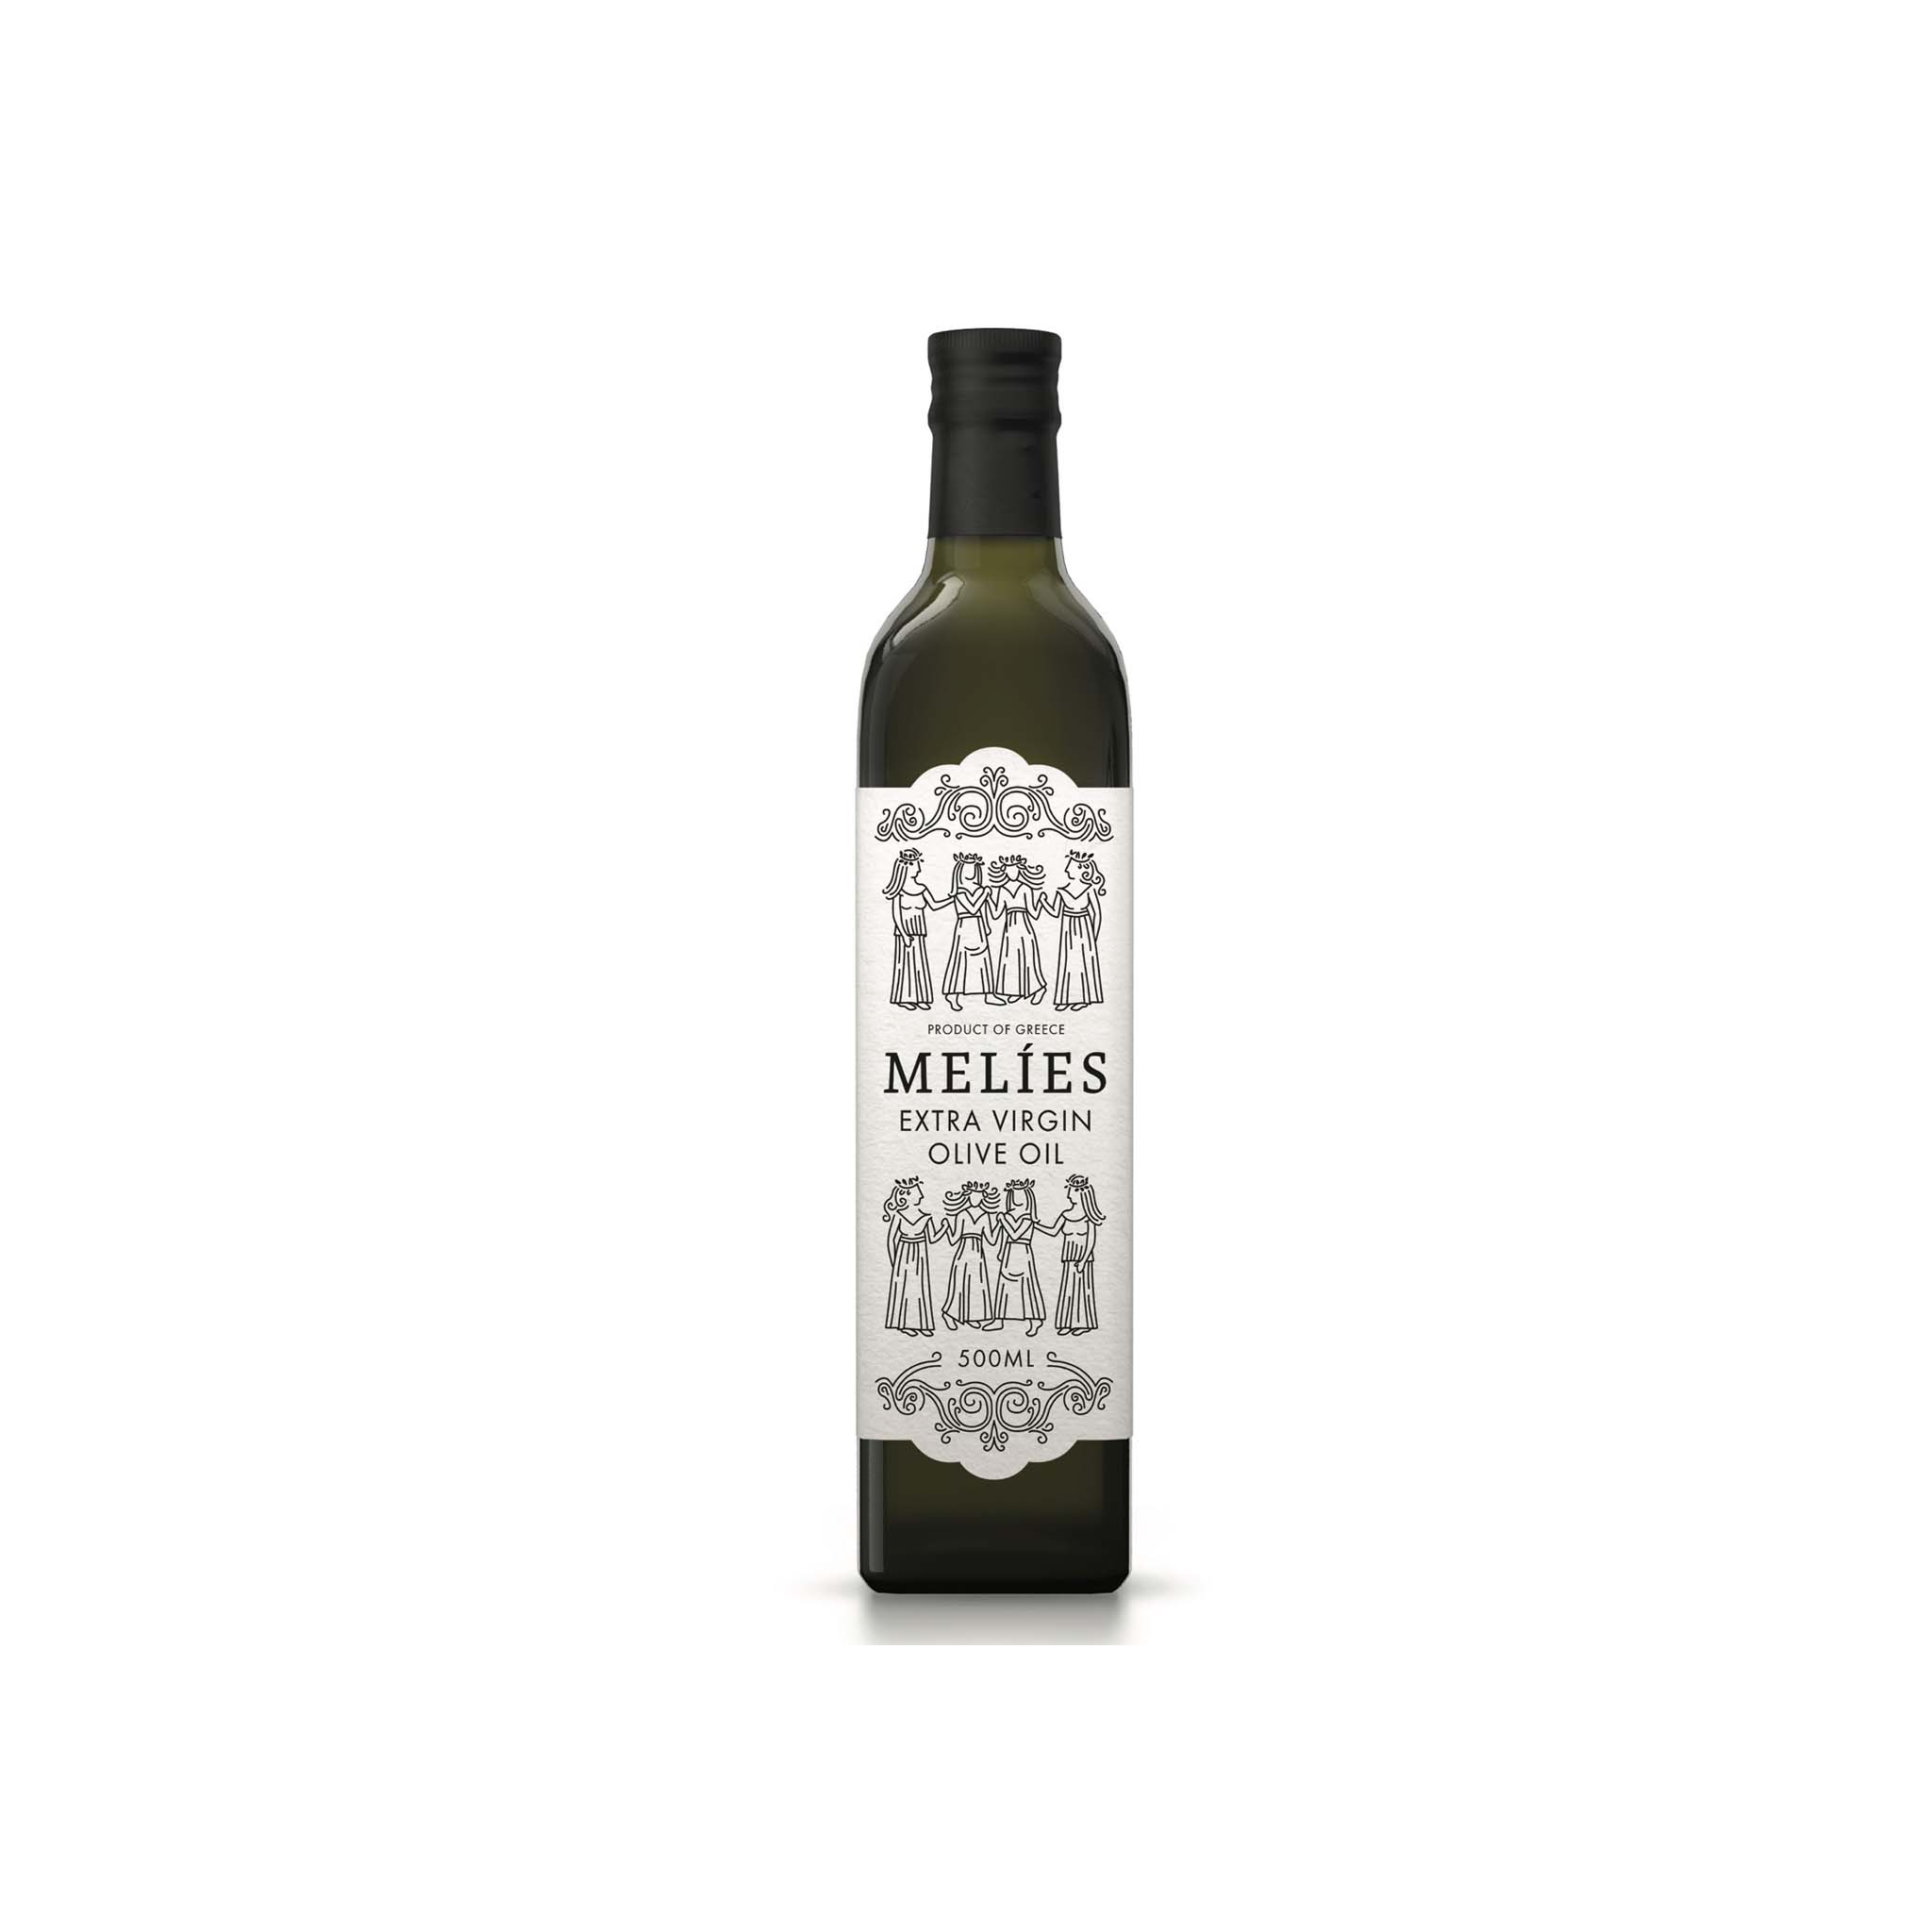 MELIES EXTRA VIRGIN OLIVE OIL EARLY HARVEST 2020 500ml